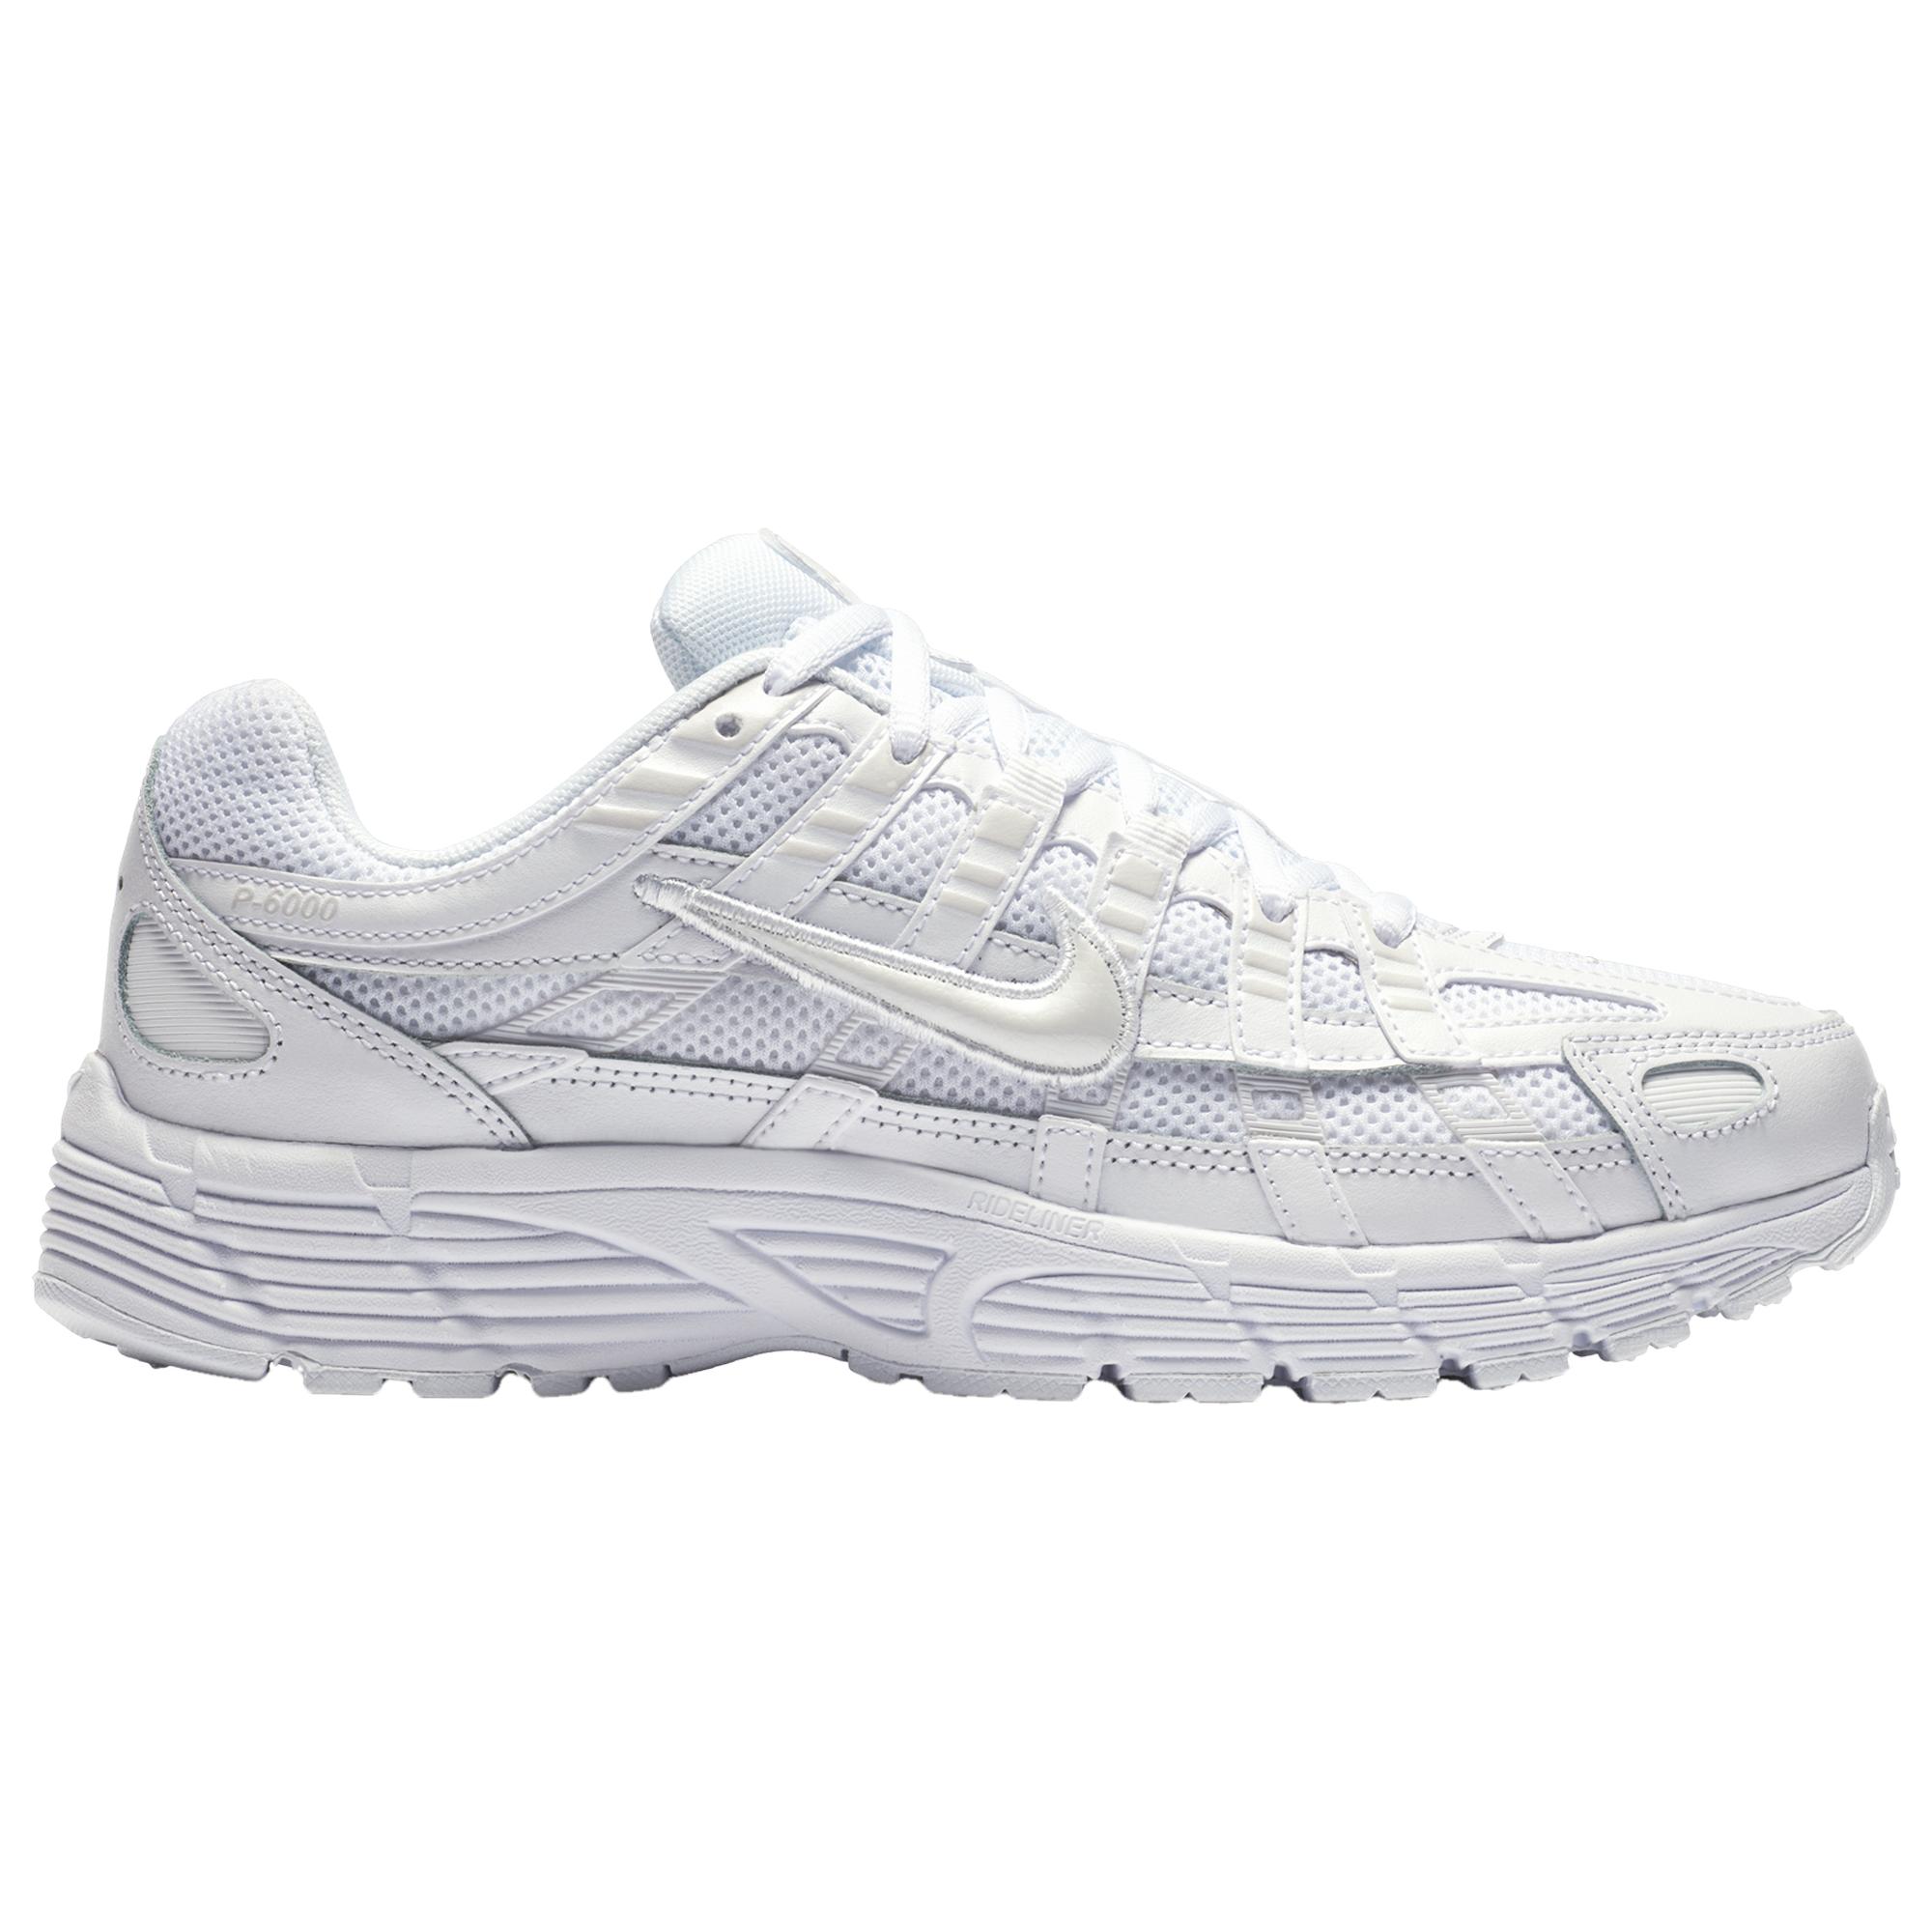 Nike Leather P-6000 in wh/wh (White) | Lyst